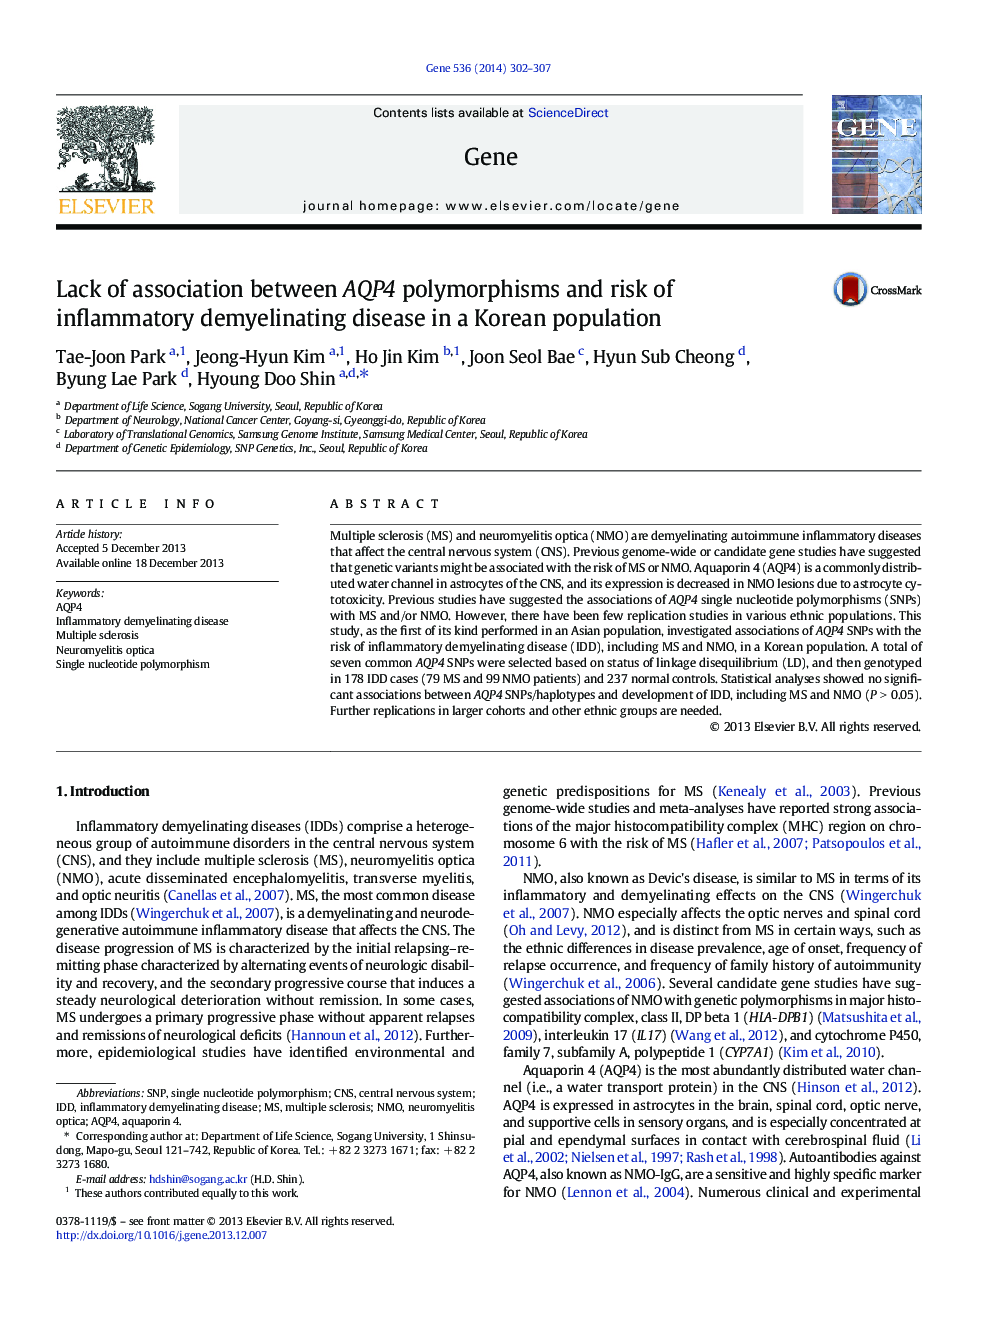 Lack of association between AQP4 polymorphisms and risk of inflammatory demyelinating disease in a Korean population